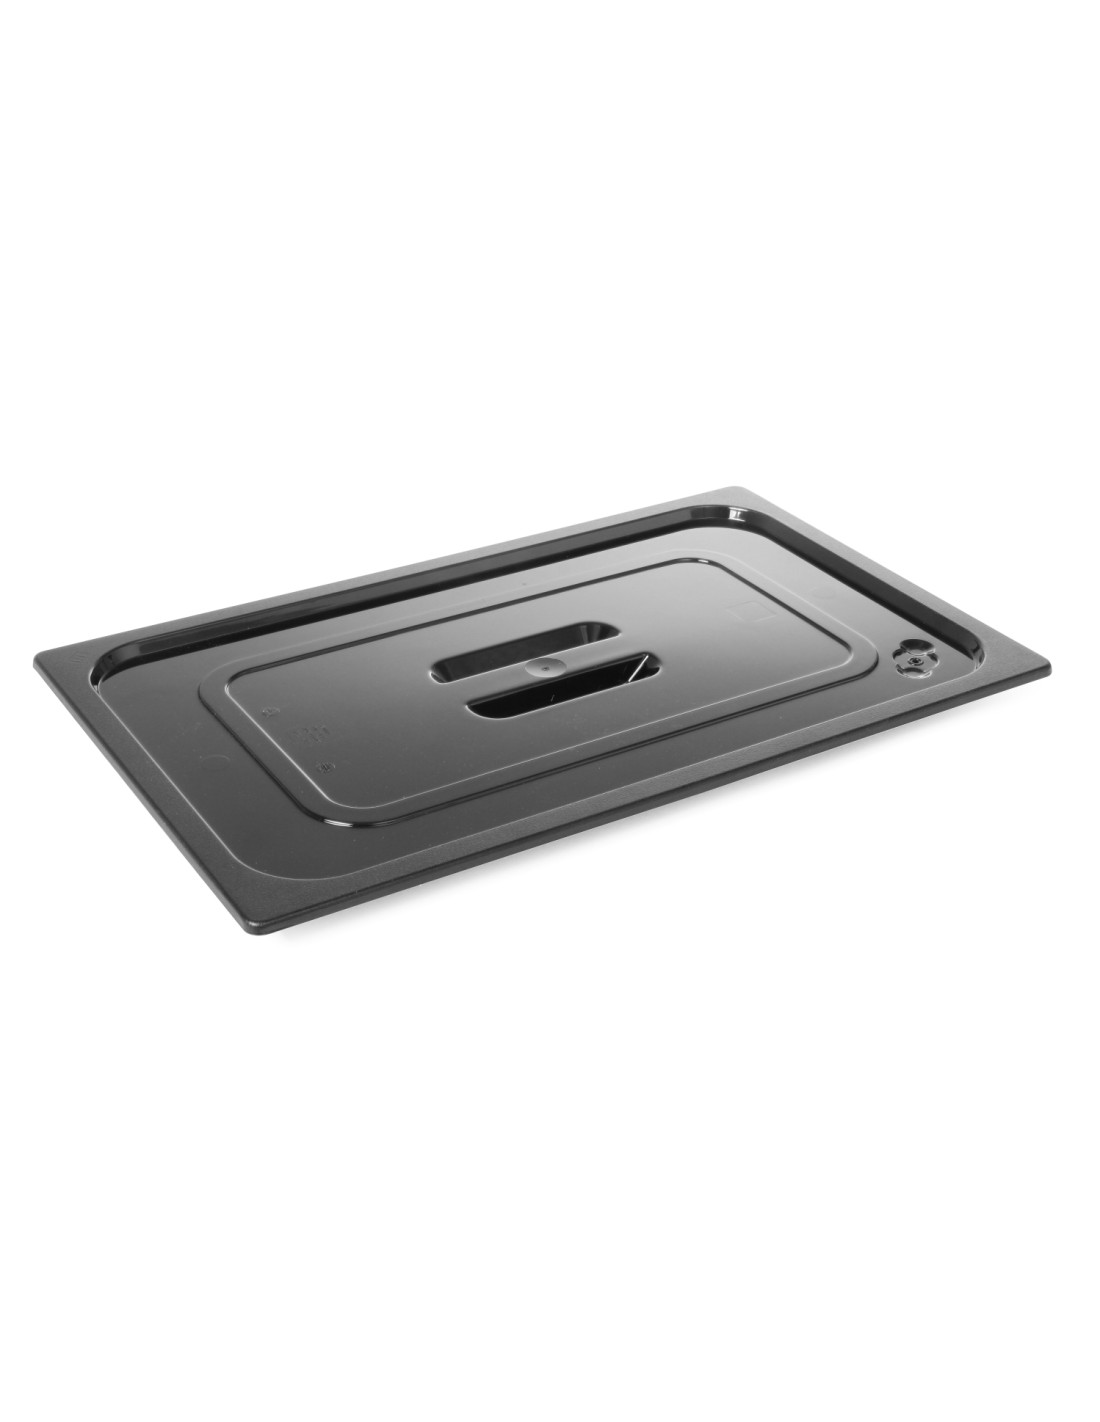 Lid for GN 1/4 trays - In black polycarbonate - mm 265 x 162